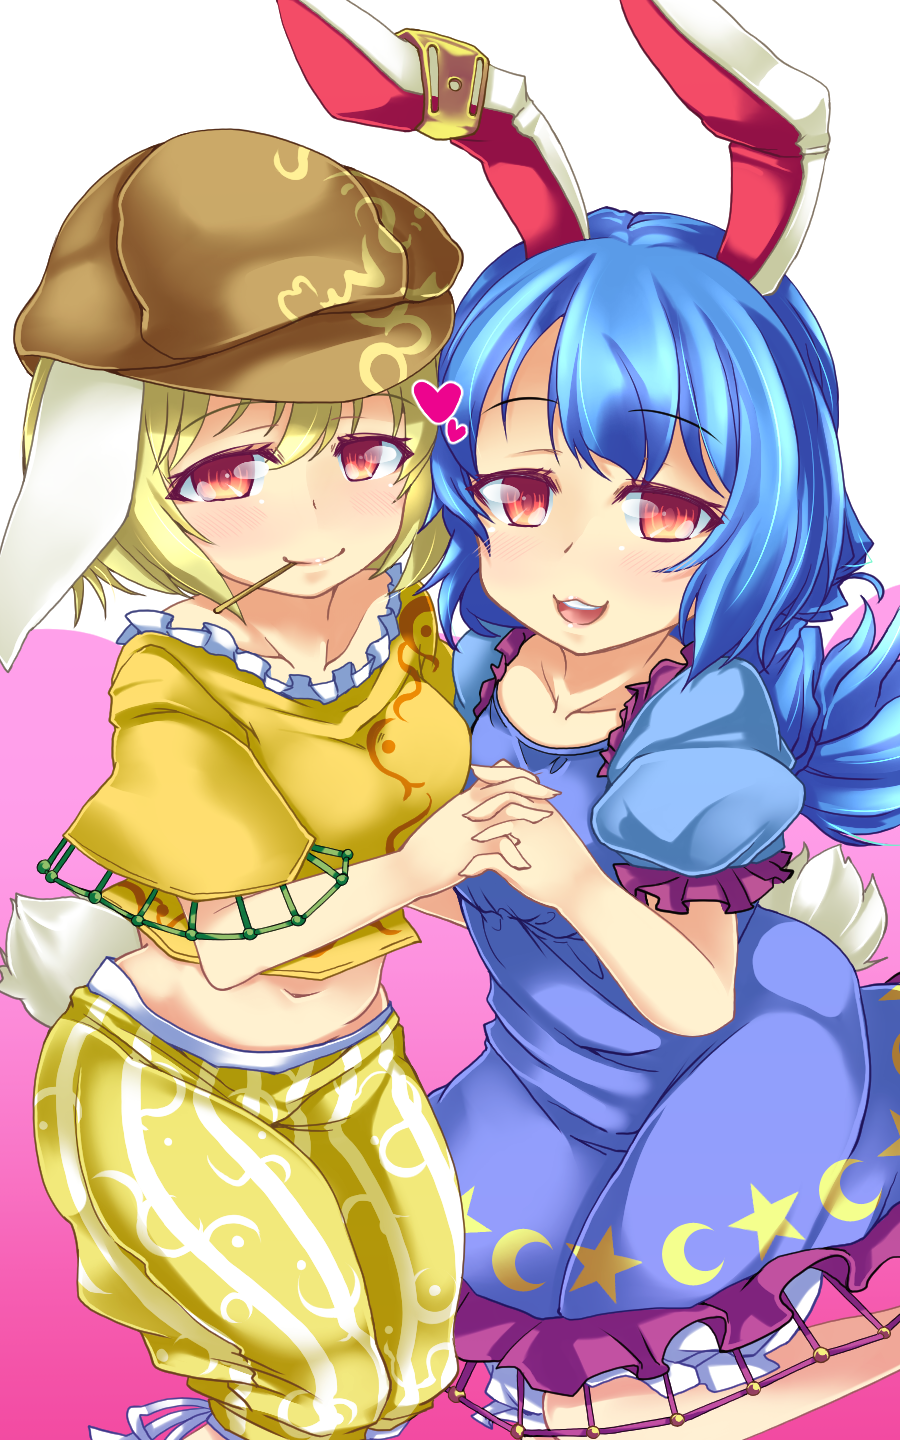 2girls animal_ears arm_behind_back blonde_hair bloomers blue_dress blue_hair bunny_tail crescent crop_top dress ear_clip flat_cap folded_leg hat head_to_head heart highres holding_hands interlocked_fingers konata_gazel long_hair looking_at_viewer midriff multiple_girls navel open_mouth ponytail puffy_short_sleeves puffy_sleeves rabbit_ears red_eyes ringo_(touhou) seiran_(touhou) short_hair short_sleeves shorts simple_background smile star tail touhou two-tone_background underwear yuri